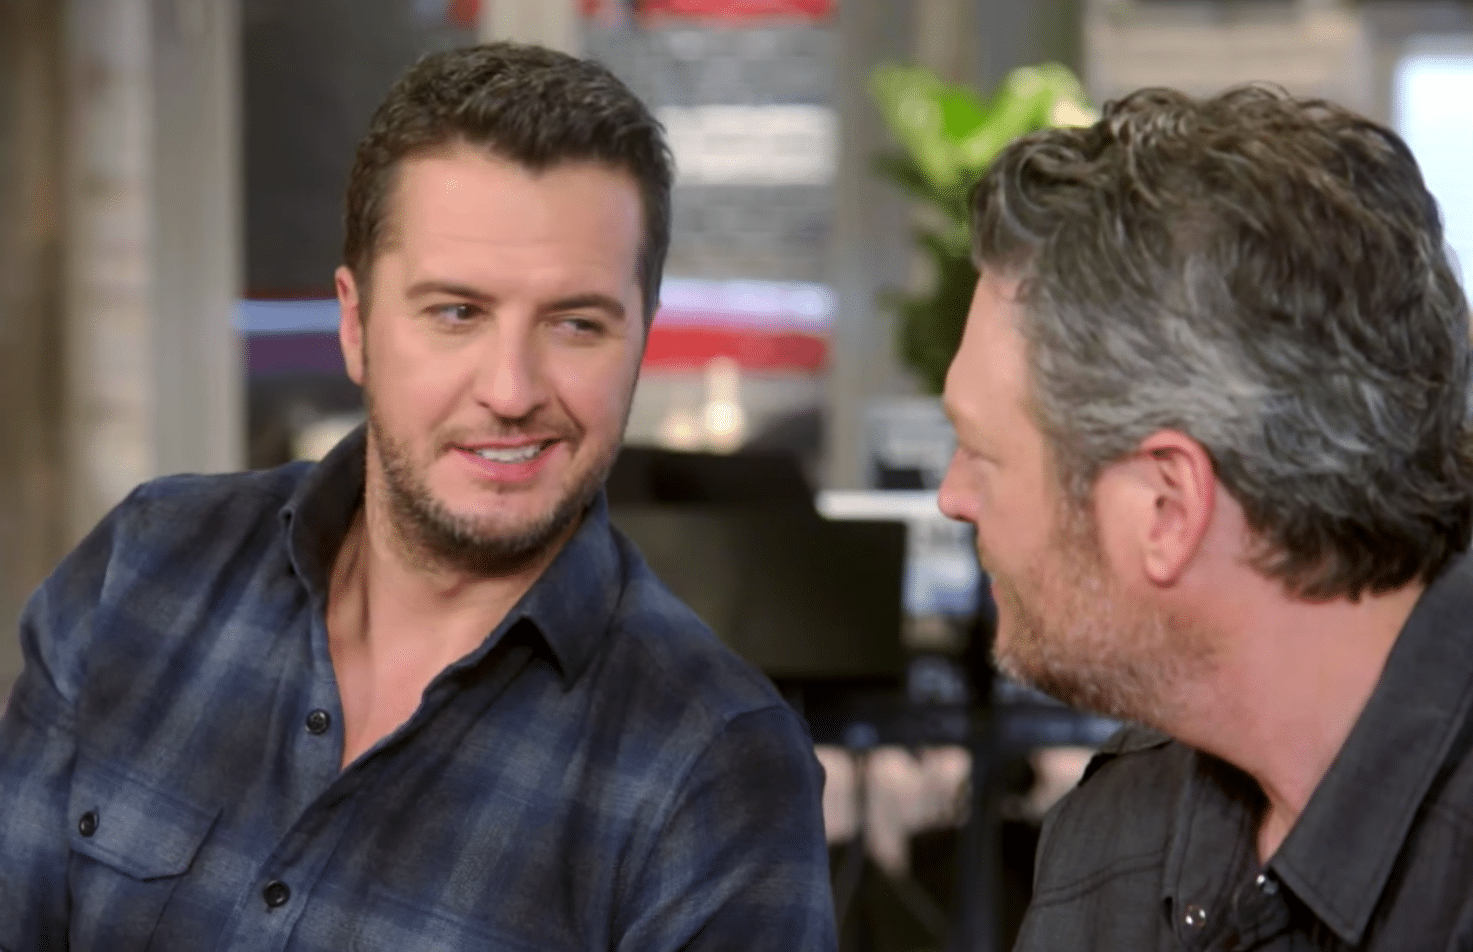 Luke and Blake are teasing each other during "The Voice" interview.